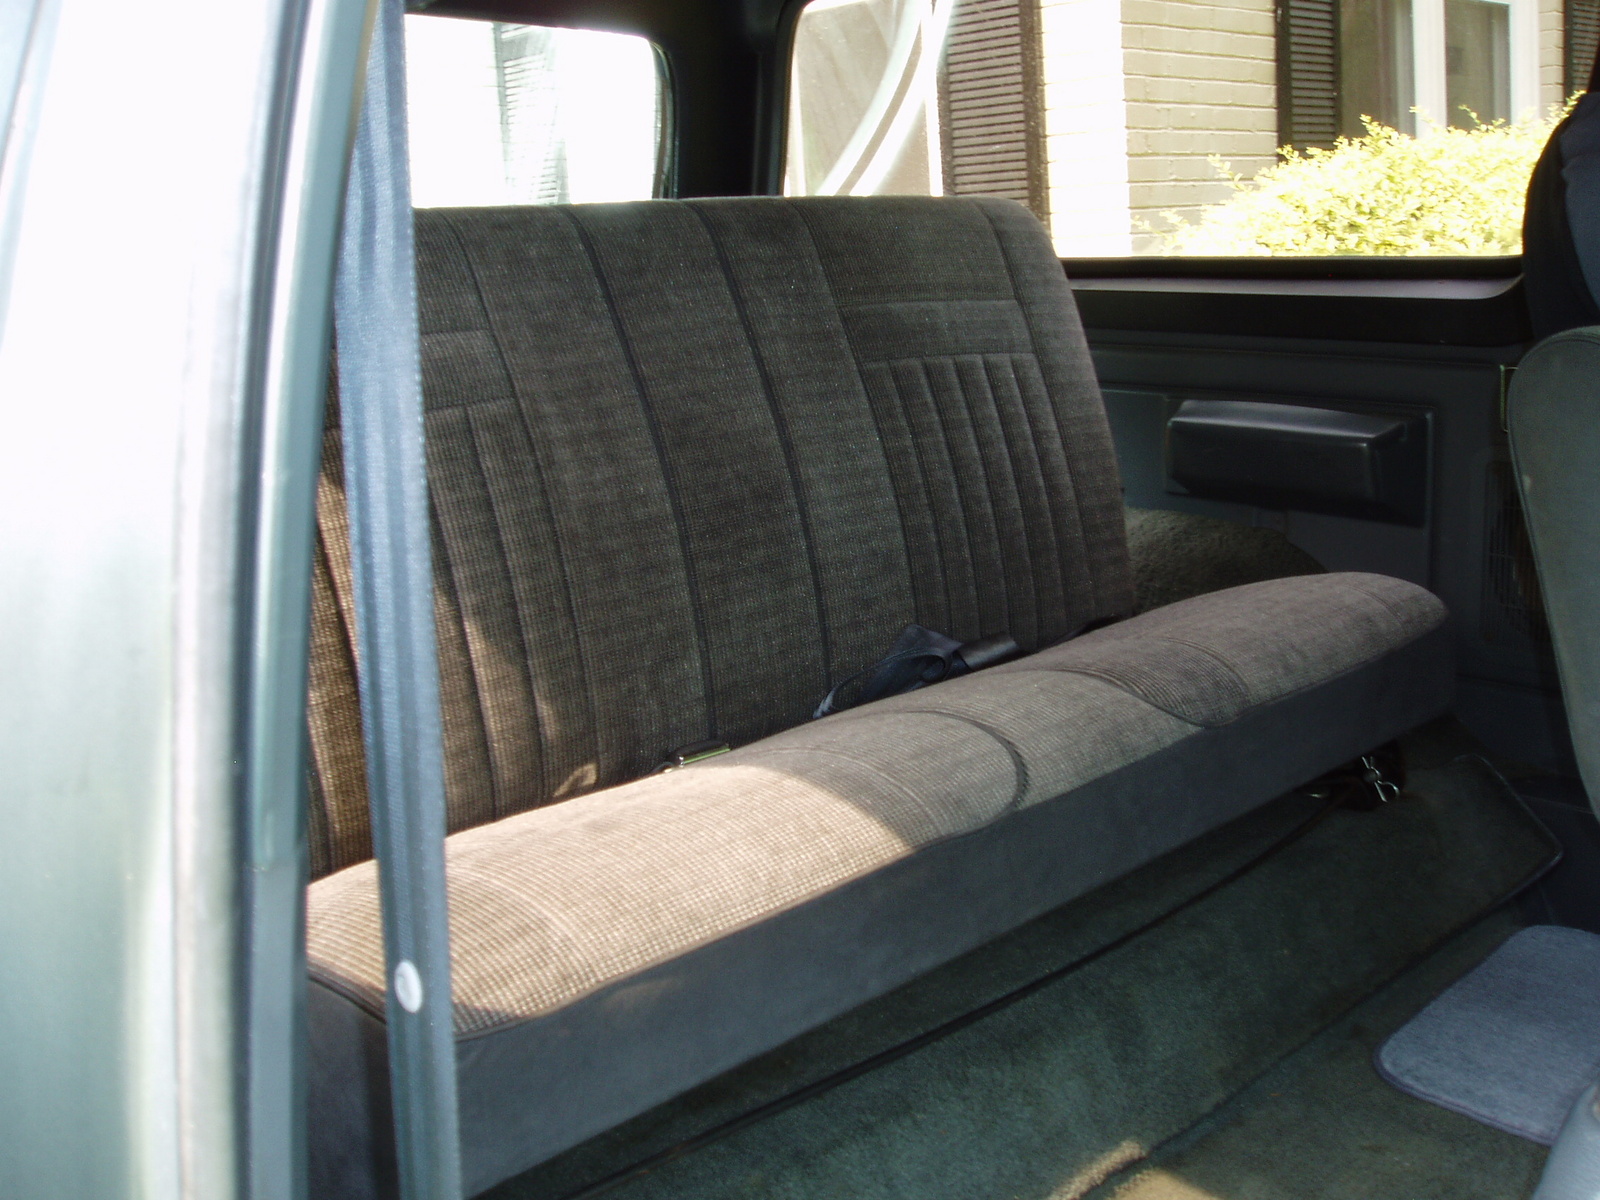 1990 Ford bronco seats #6